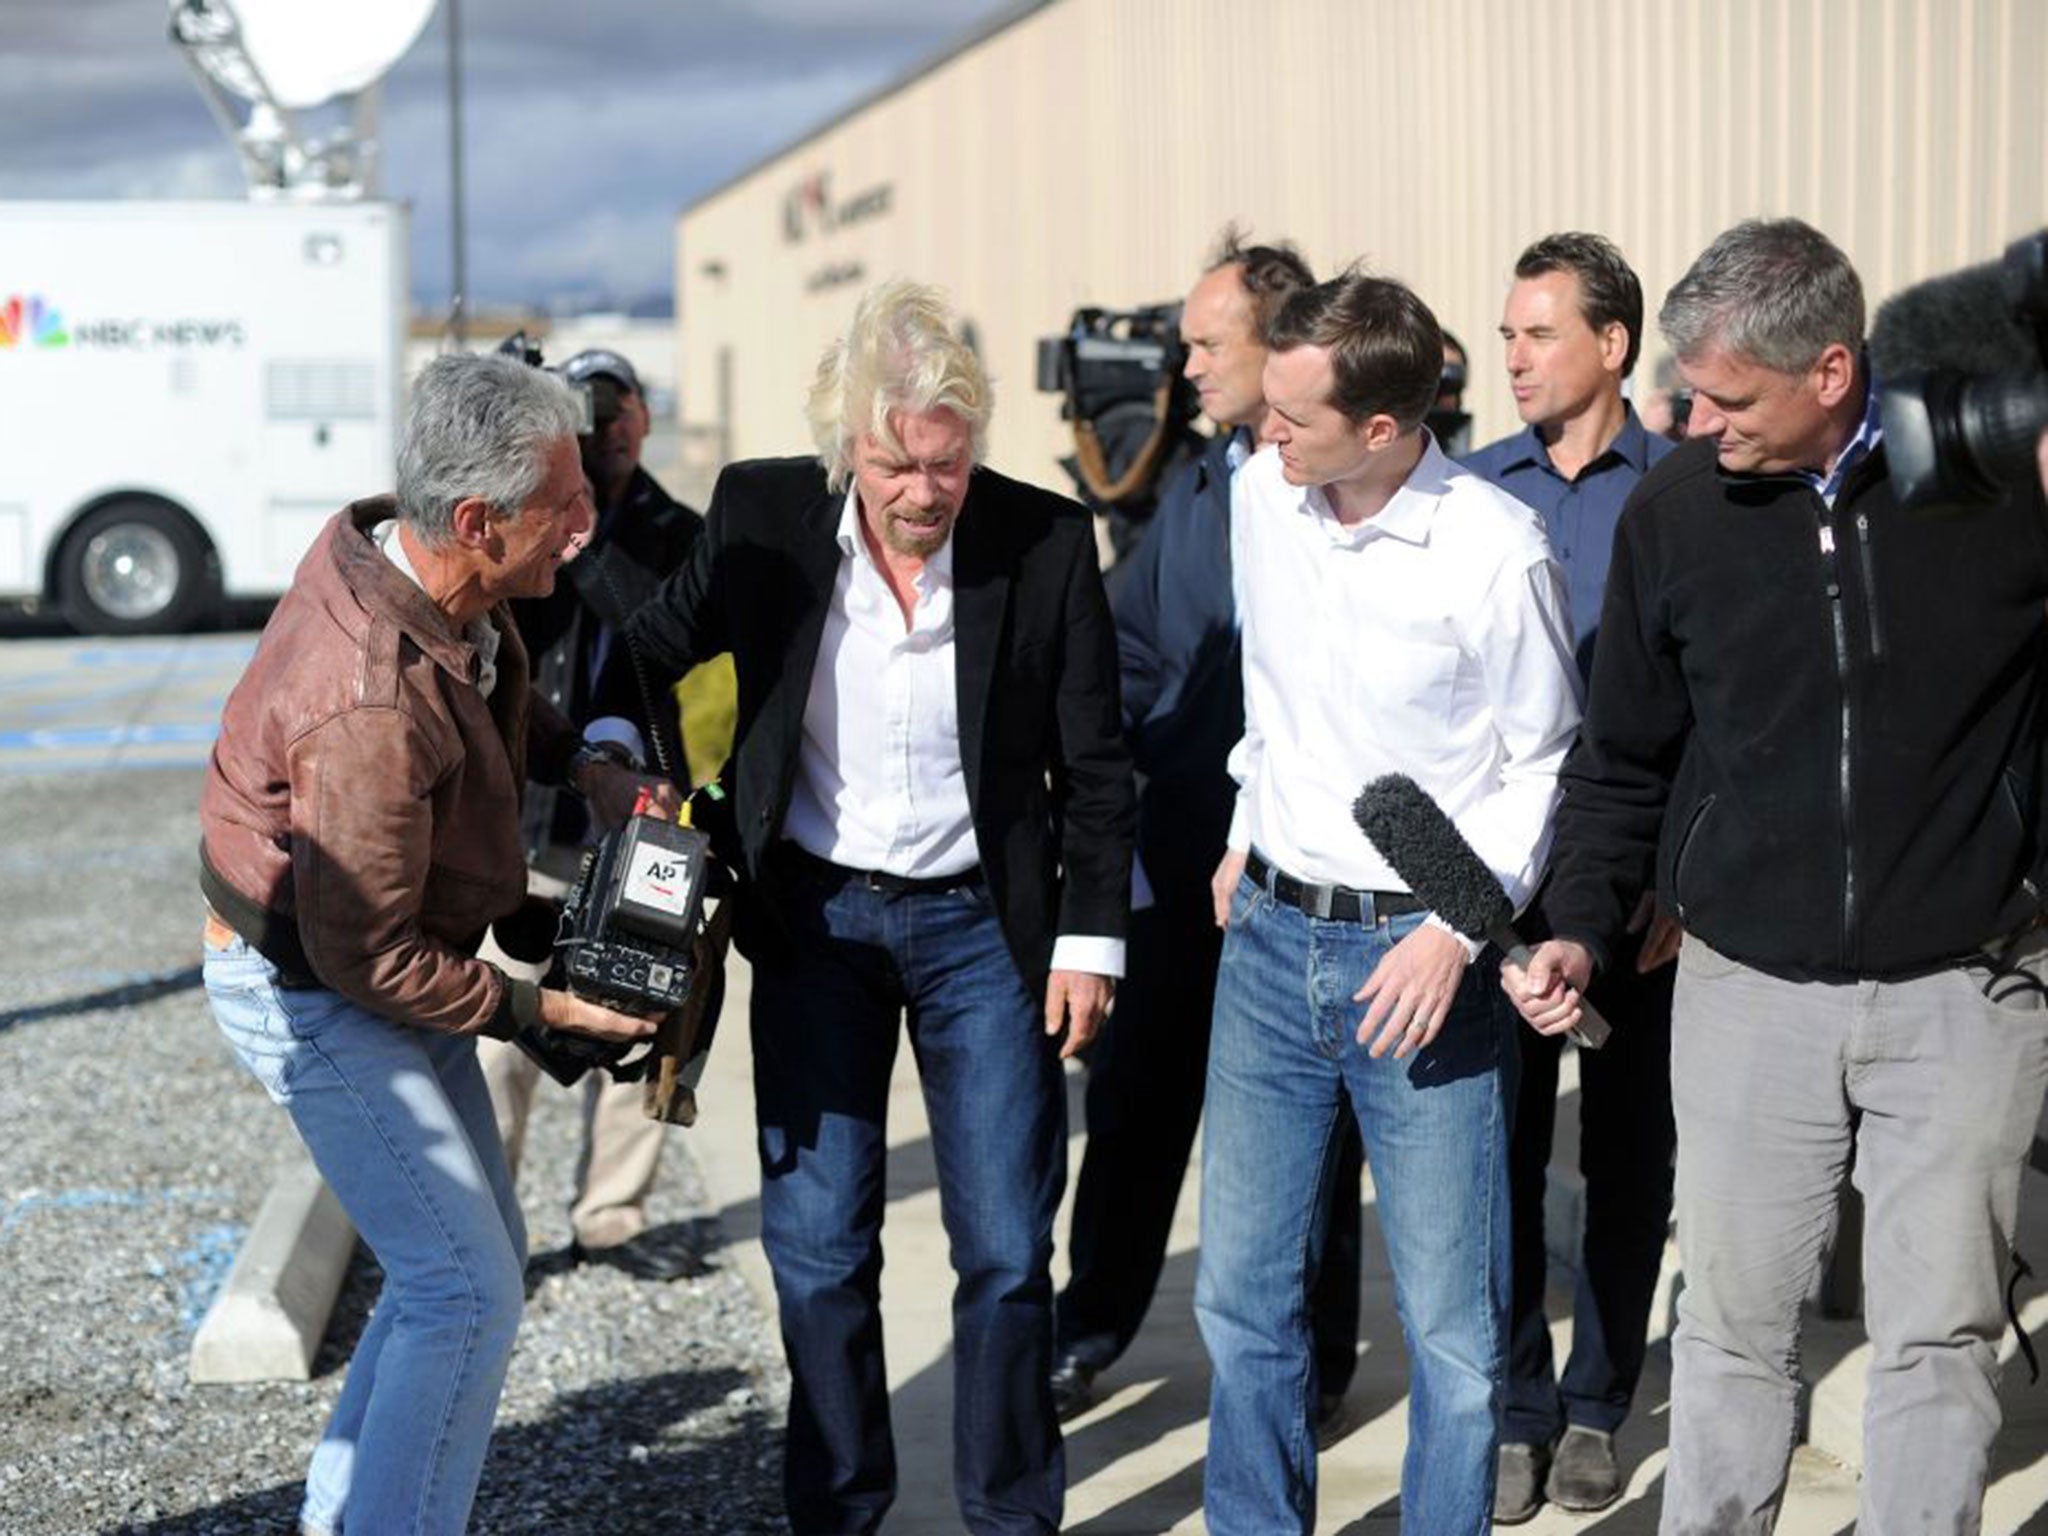 Richard Branson flew into Mojave late on Friday night to assess the wreckage of Virgin Galactic’s flagship spacecraft 